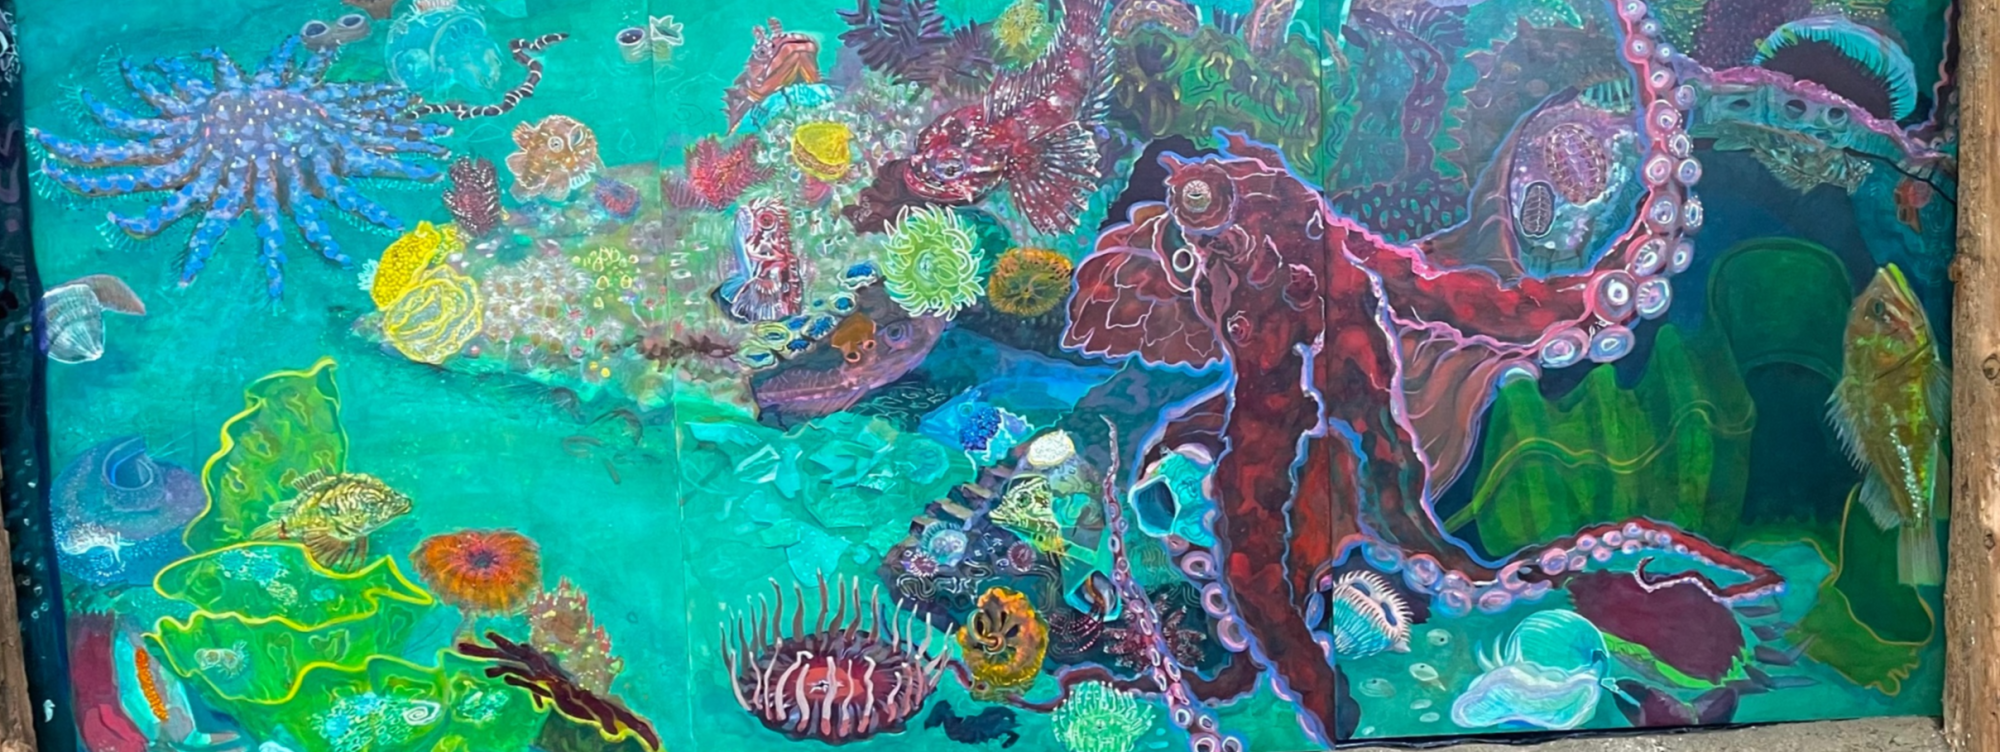 Colorful undersea mural in deep sea greens and blues featuring an octopus and other sea life from the pacific northwest.